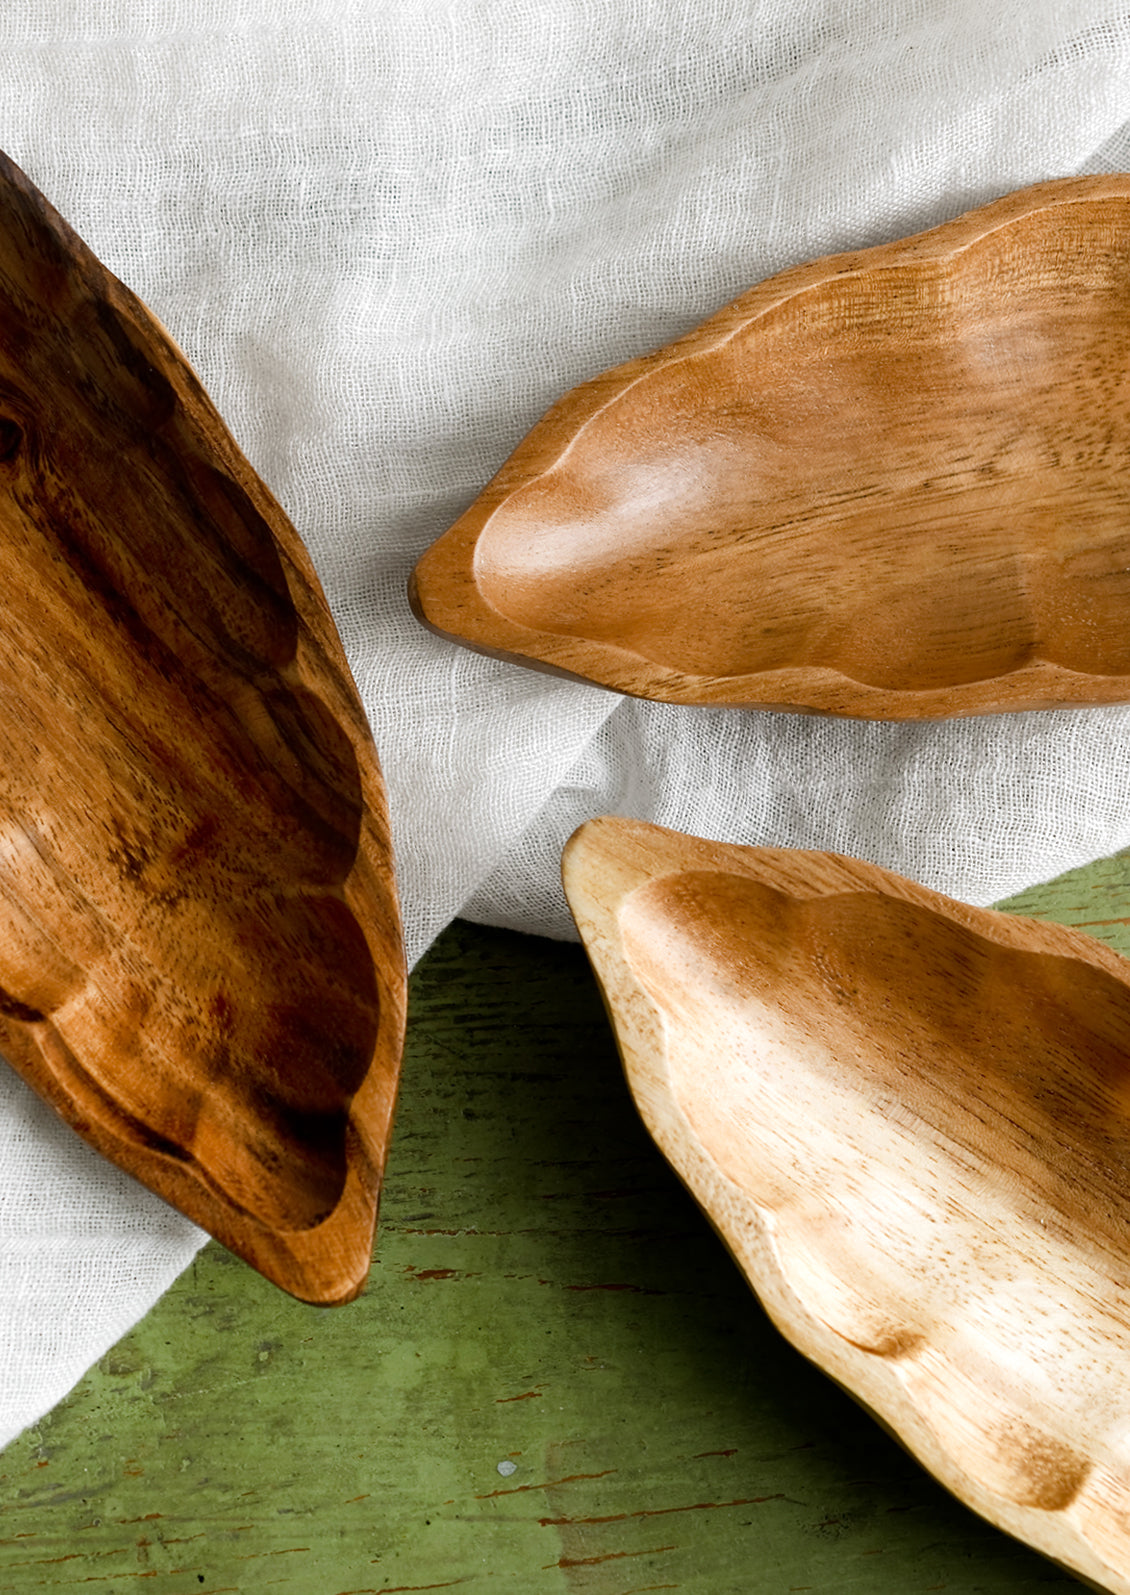 Seedpod shaped dishes in slightly varying shades of wood tone.